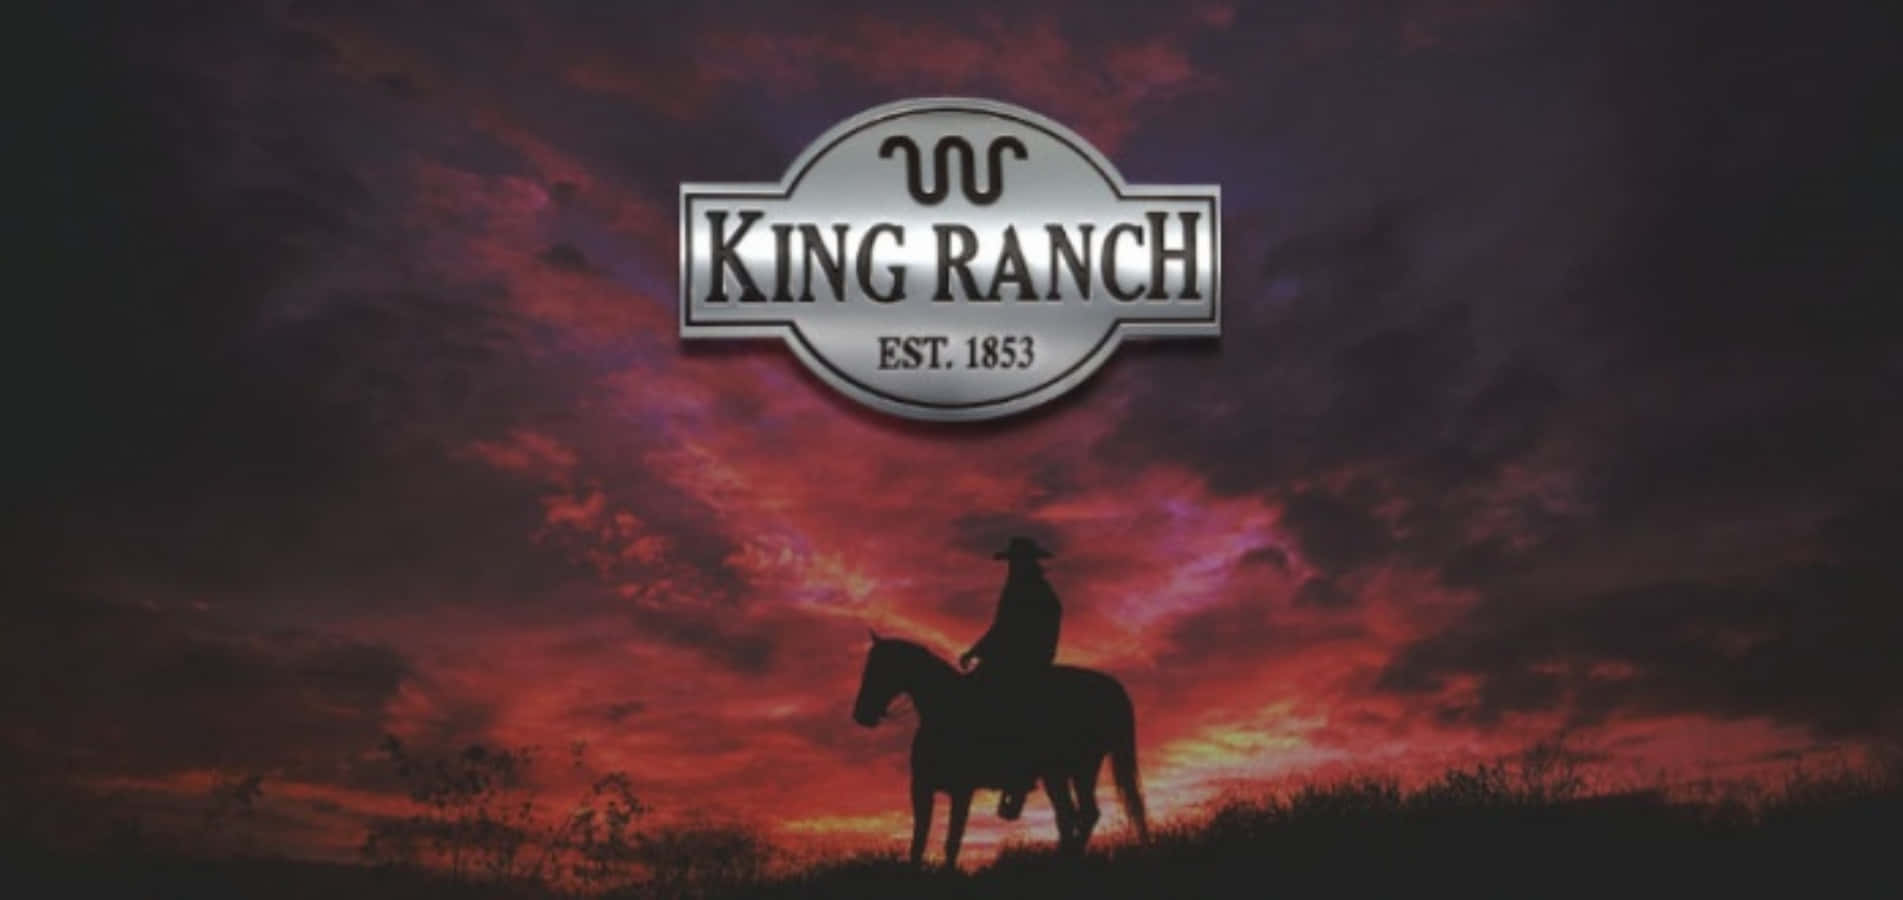 King Ranch Logo With A Silhouette Of A Cowboy Riding A Horse